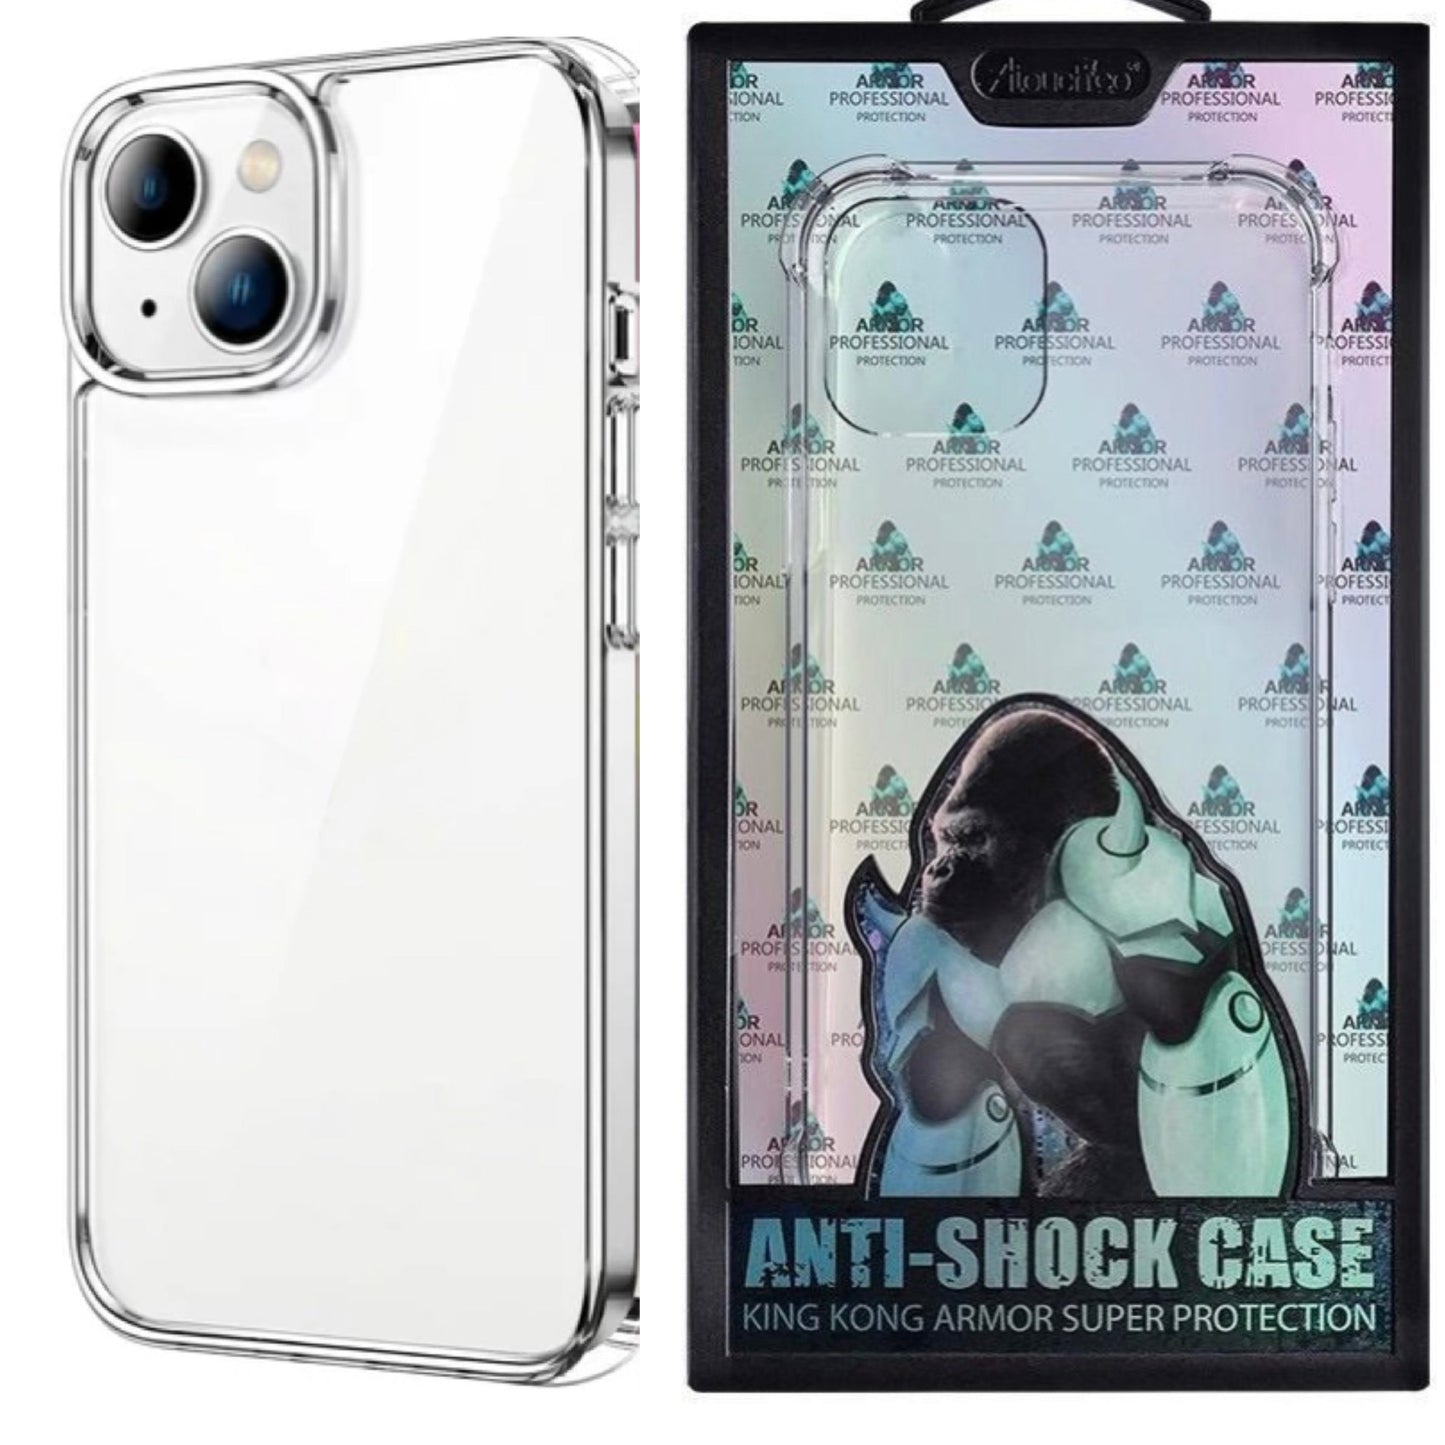 Cases for iPhone 13 saynama